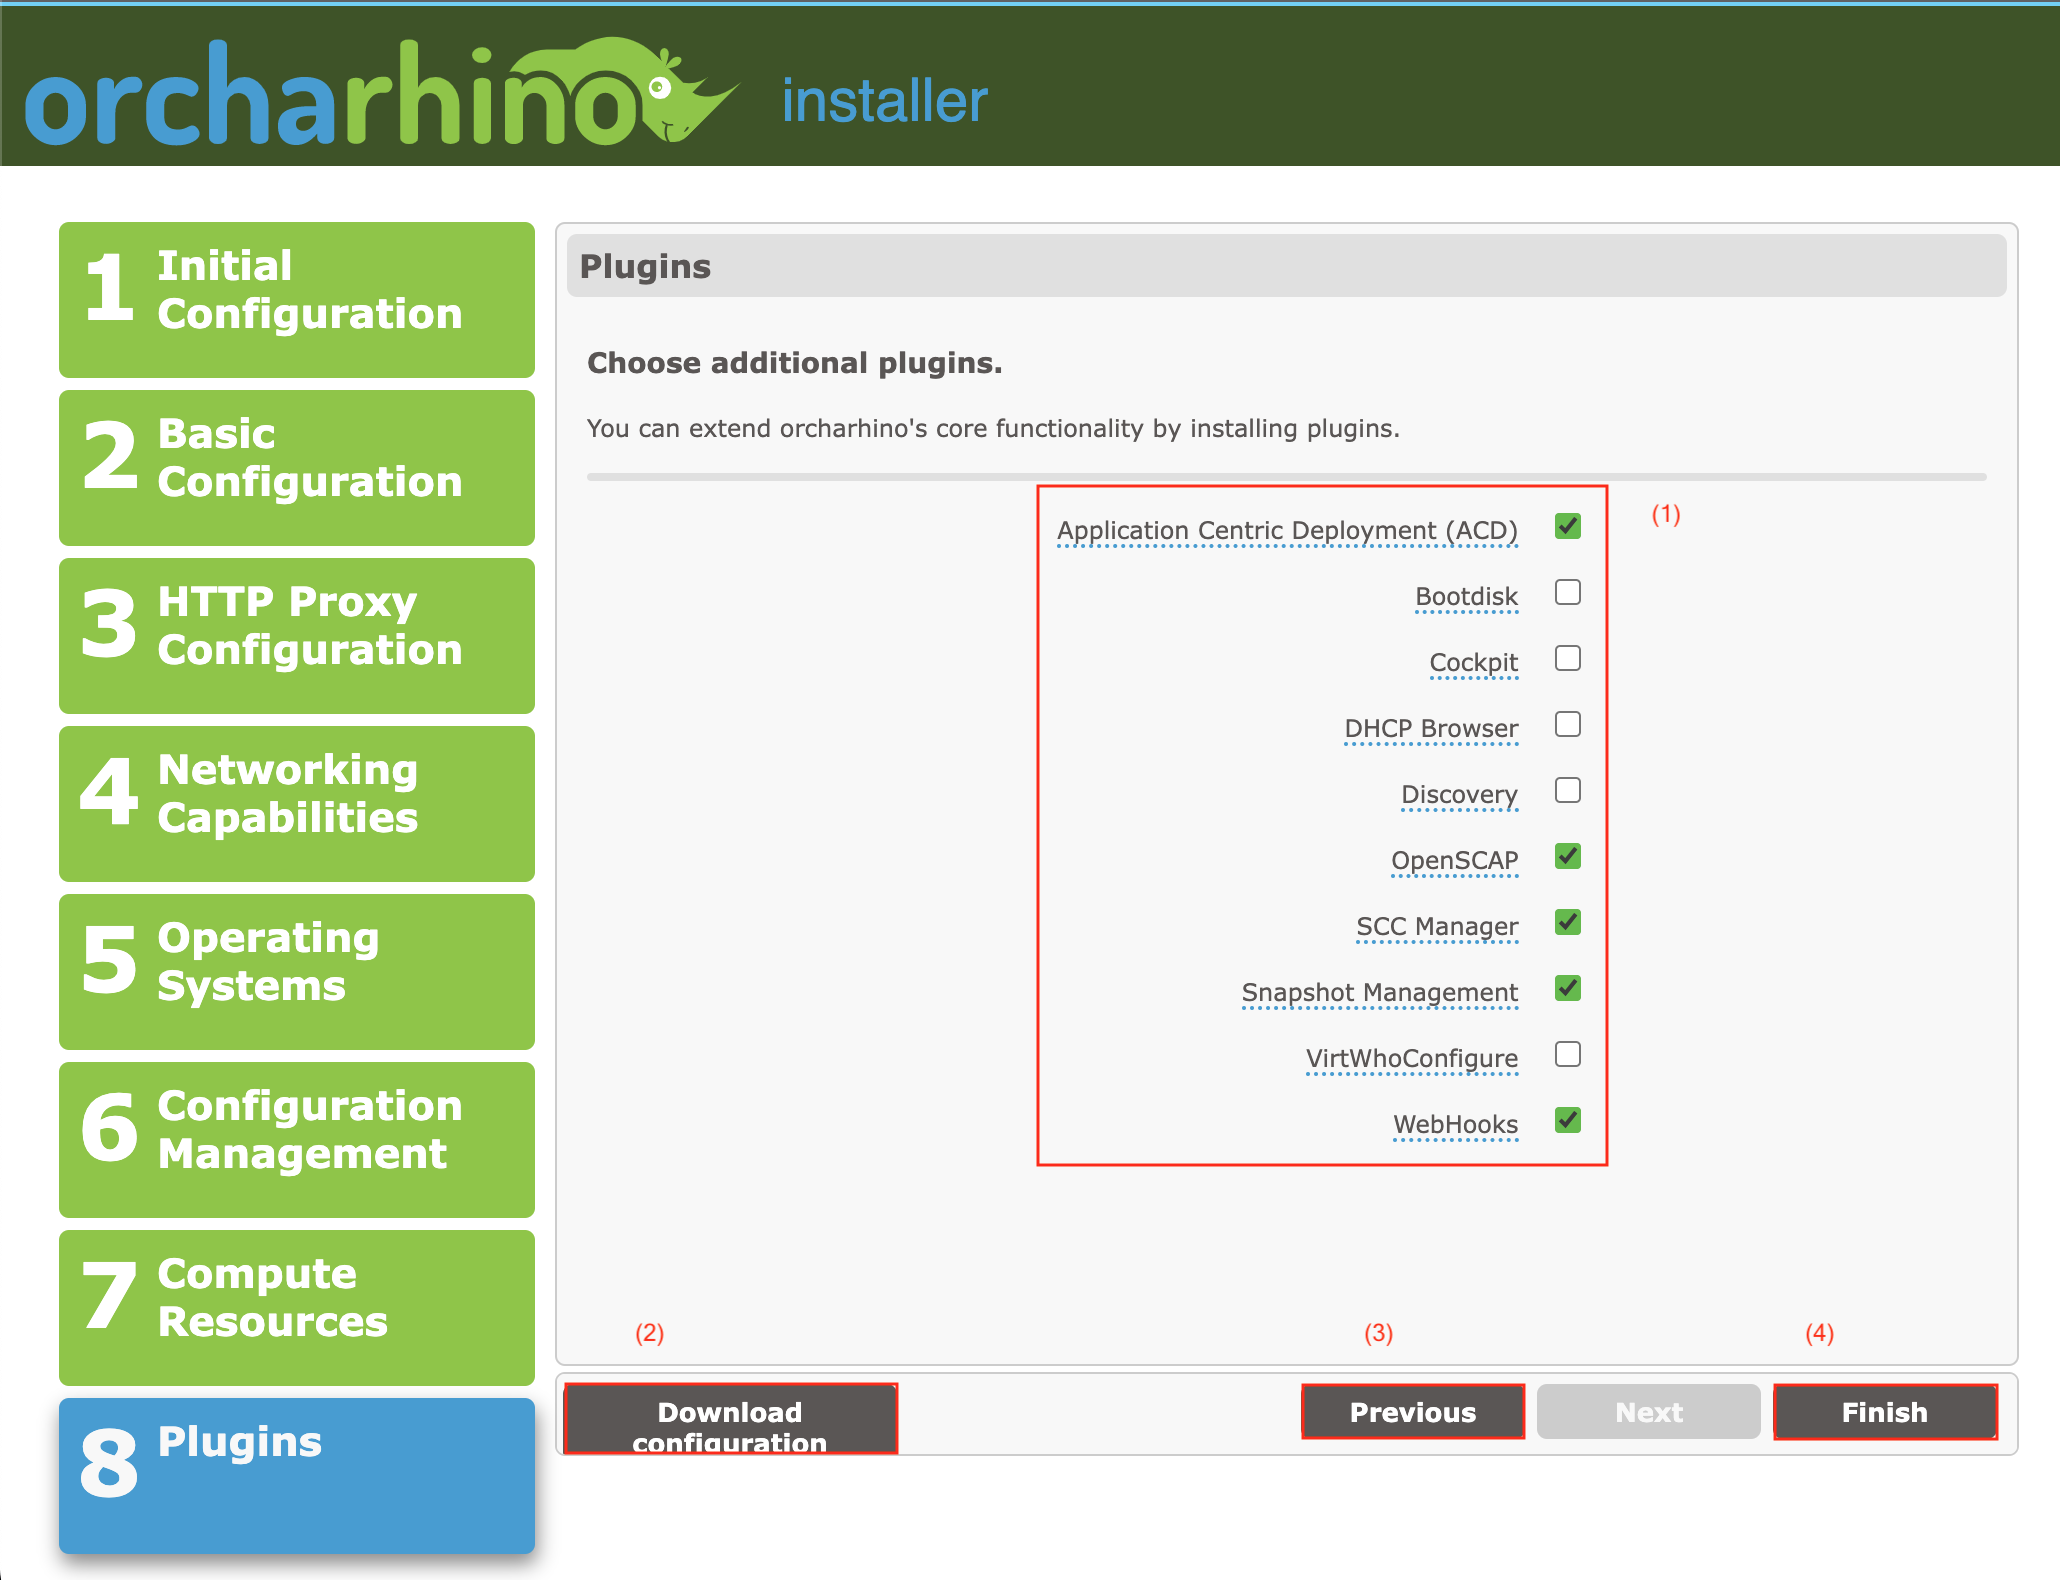 Selecting plugins in orcharhino Web Installer